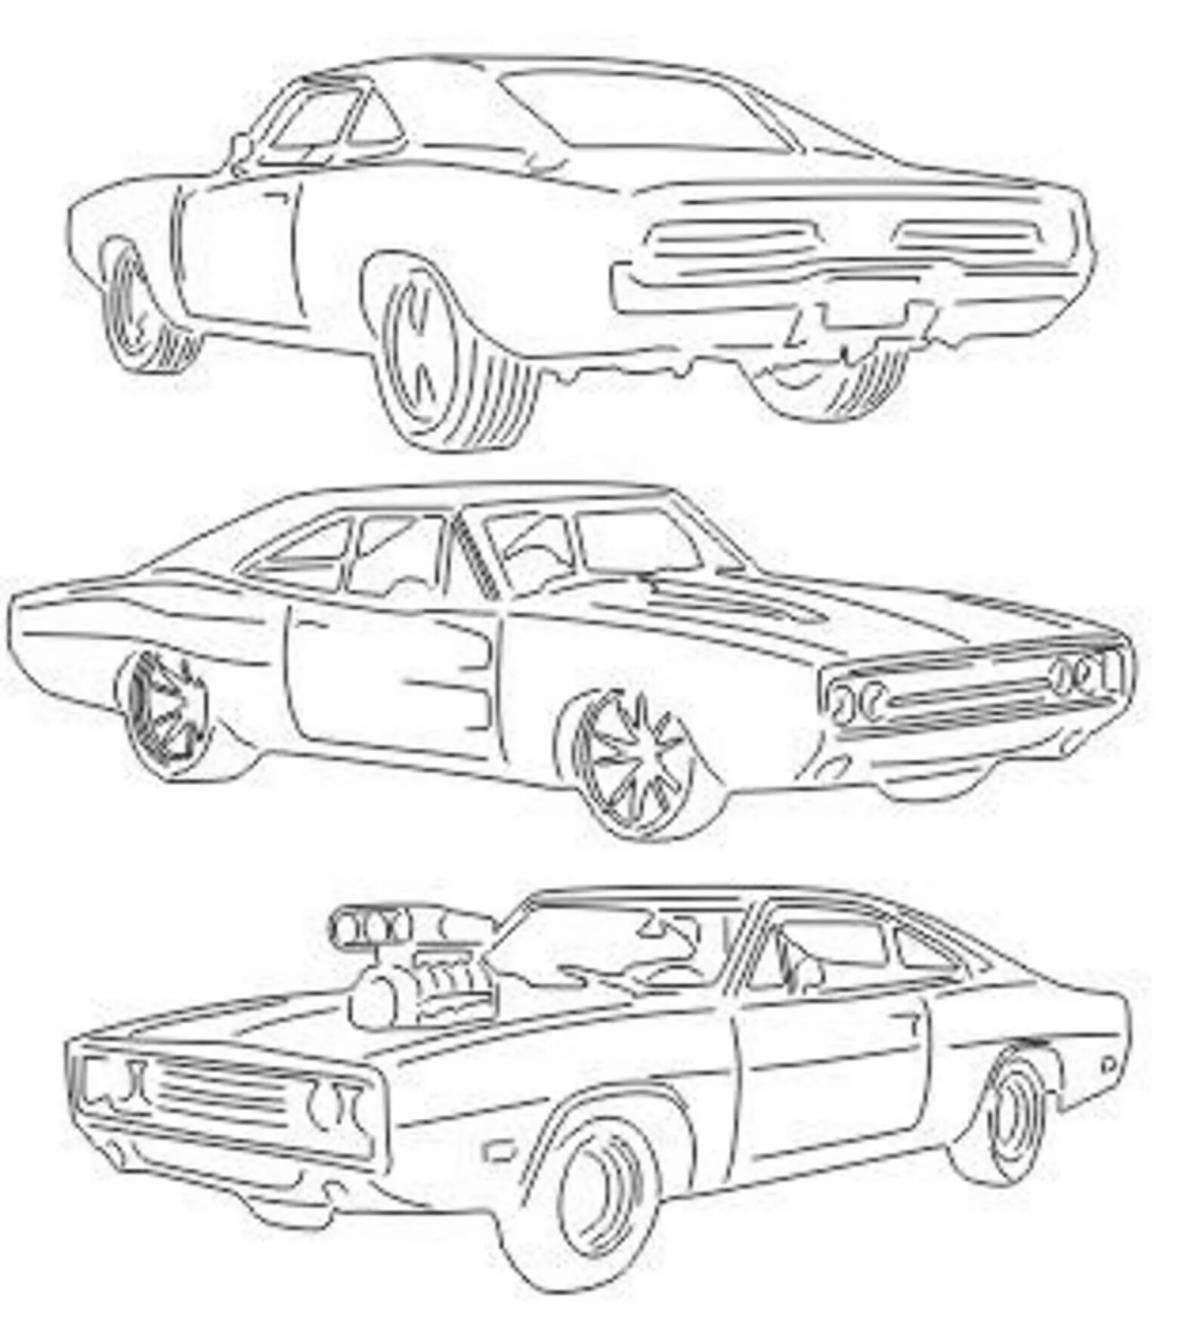 Dodge Charger from afterburner #6